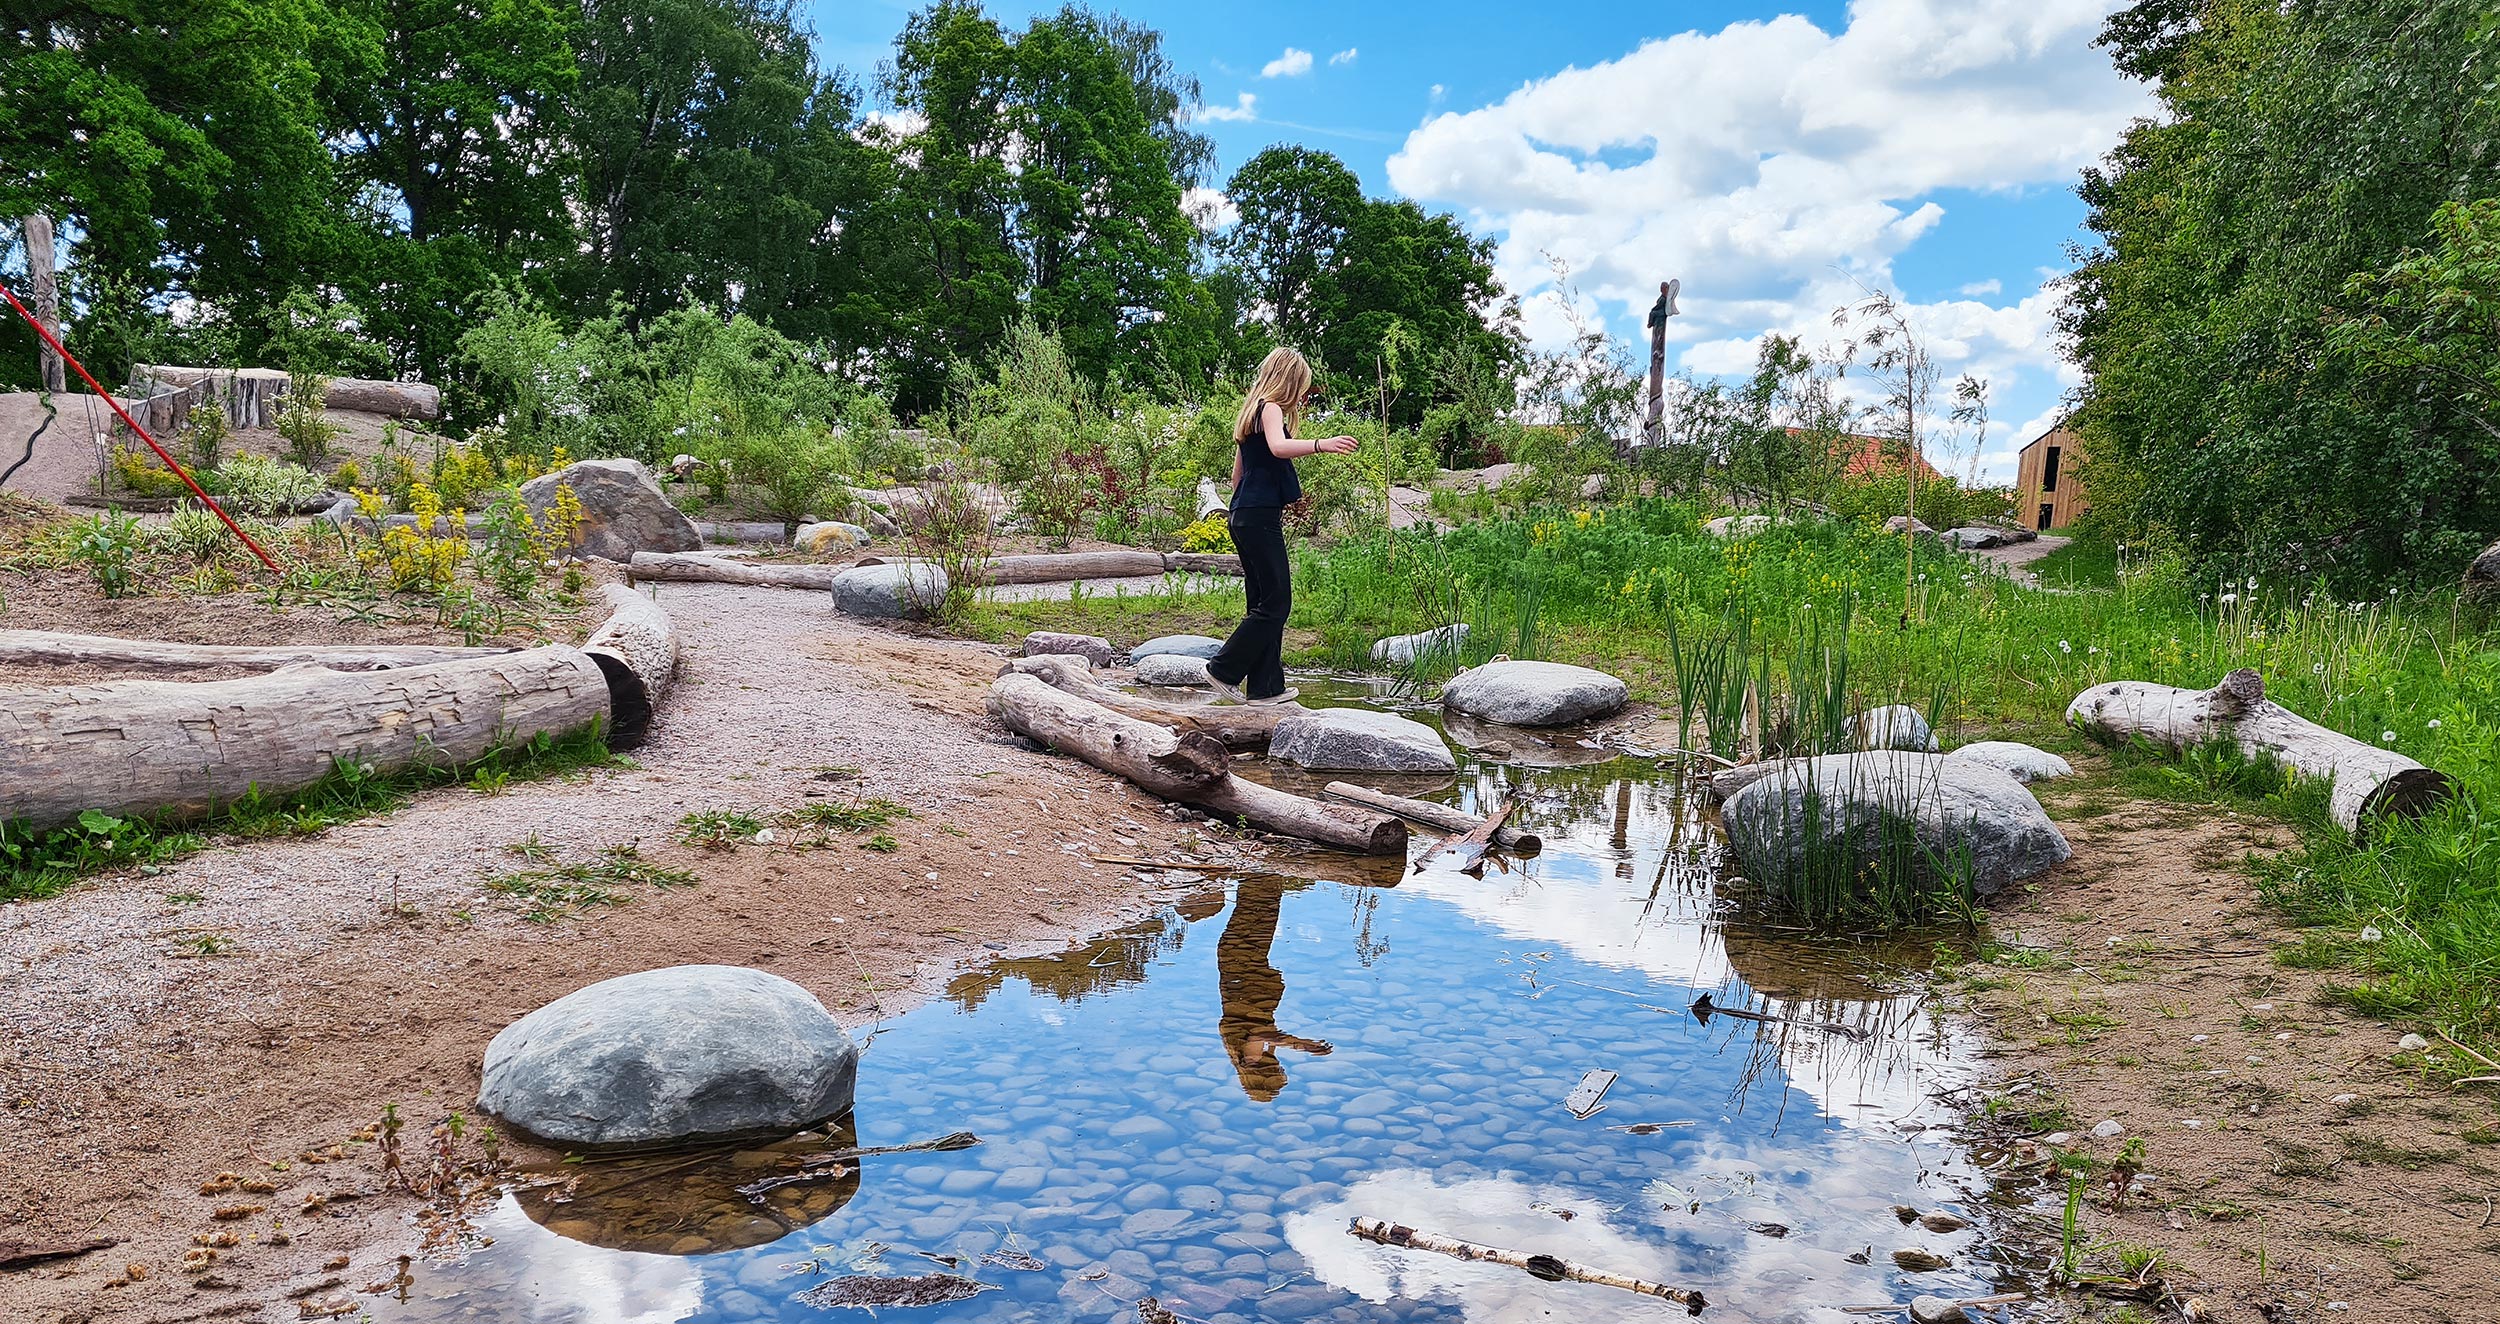 Picture of a girl balancing on a log in a park with meadow flowers, small paths, a pond and some rocks.